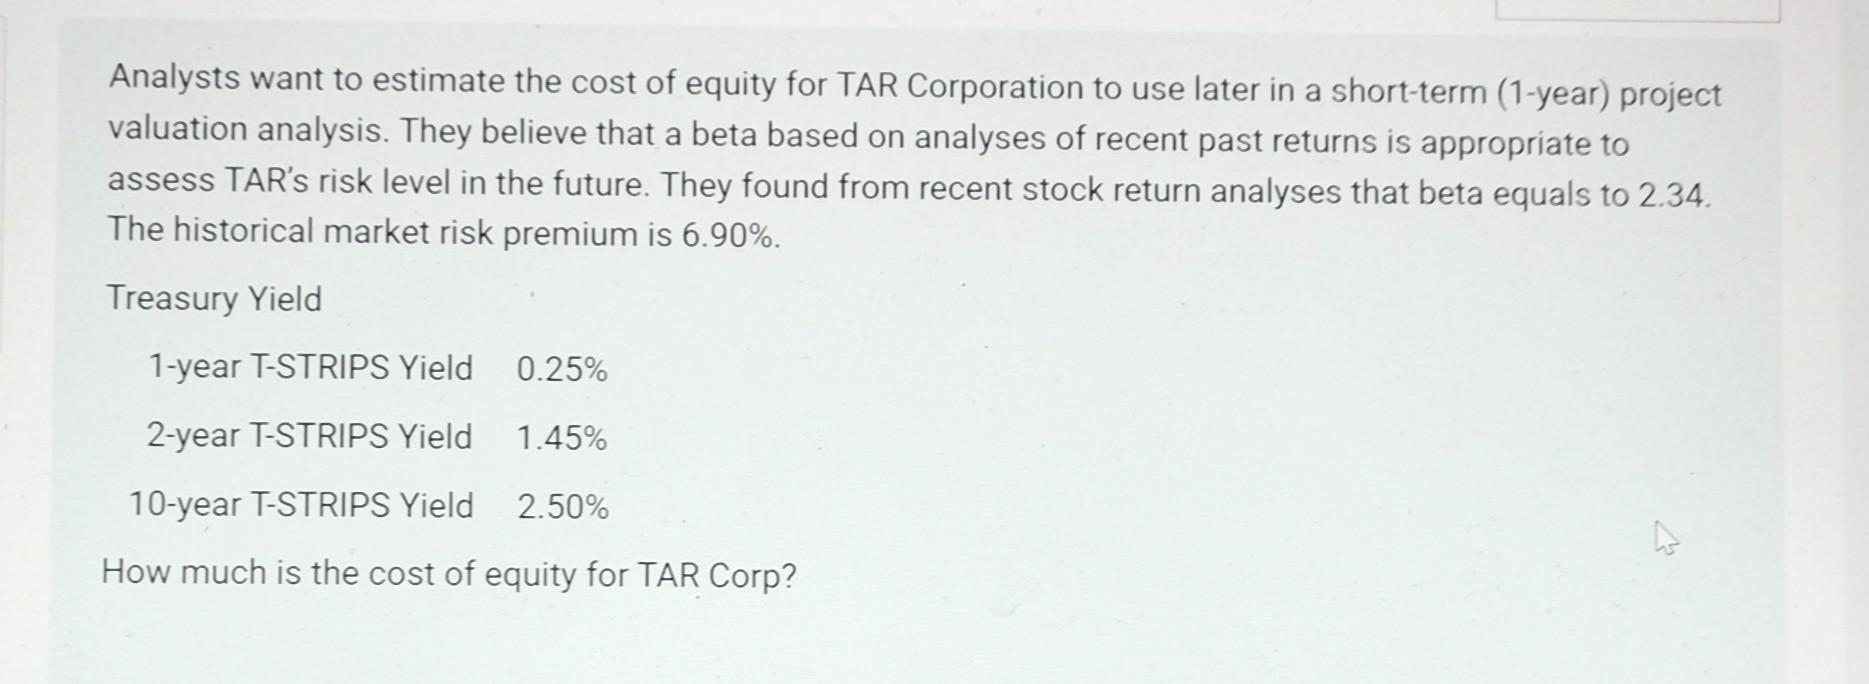 Analysts want to estimate the cost of equity for TAR Corporation to use later in a short-term (1-year)